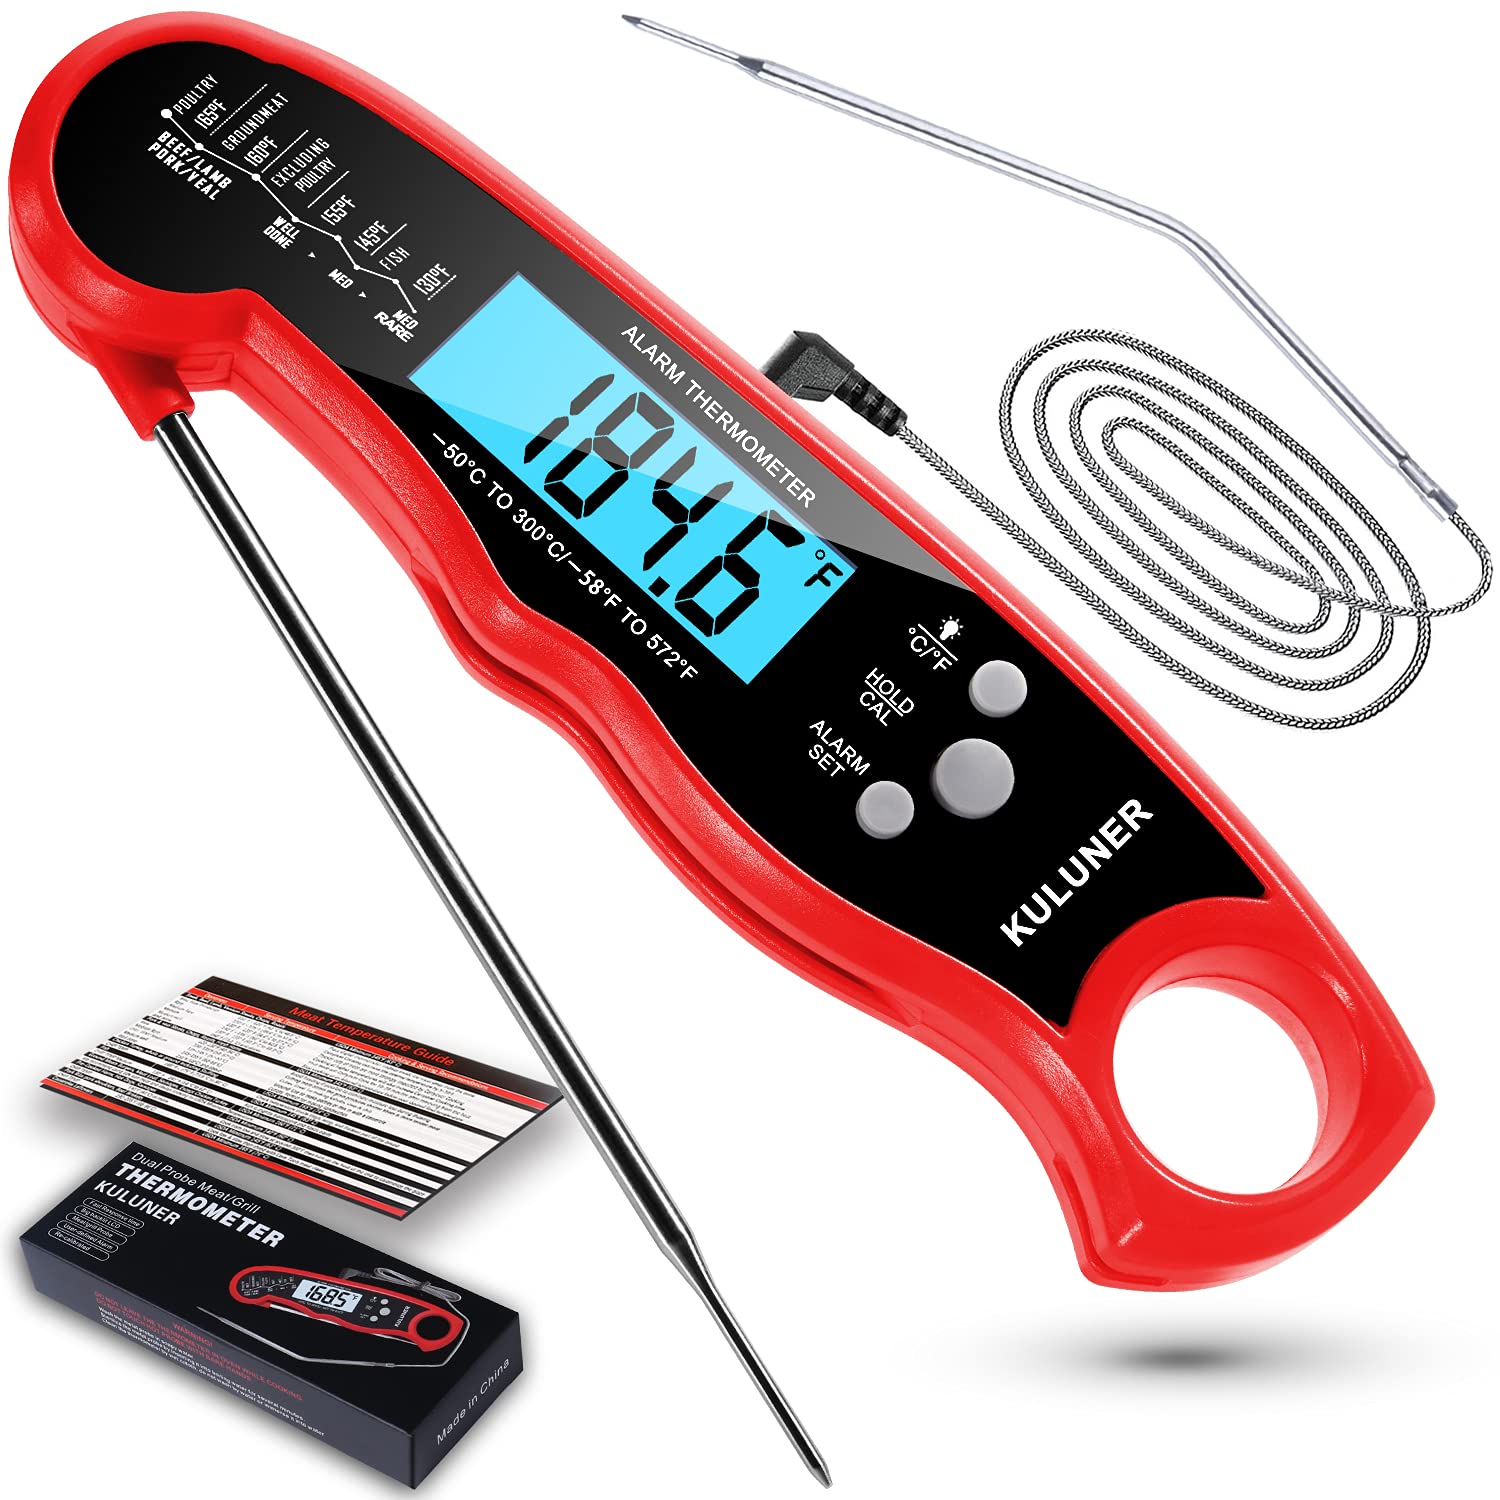 [KULUNER Upgrade] Ultra fast instant reading waterproof thermometer